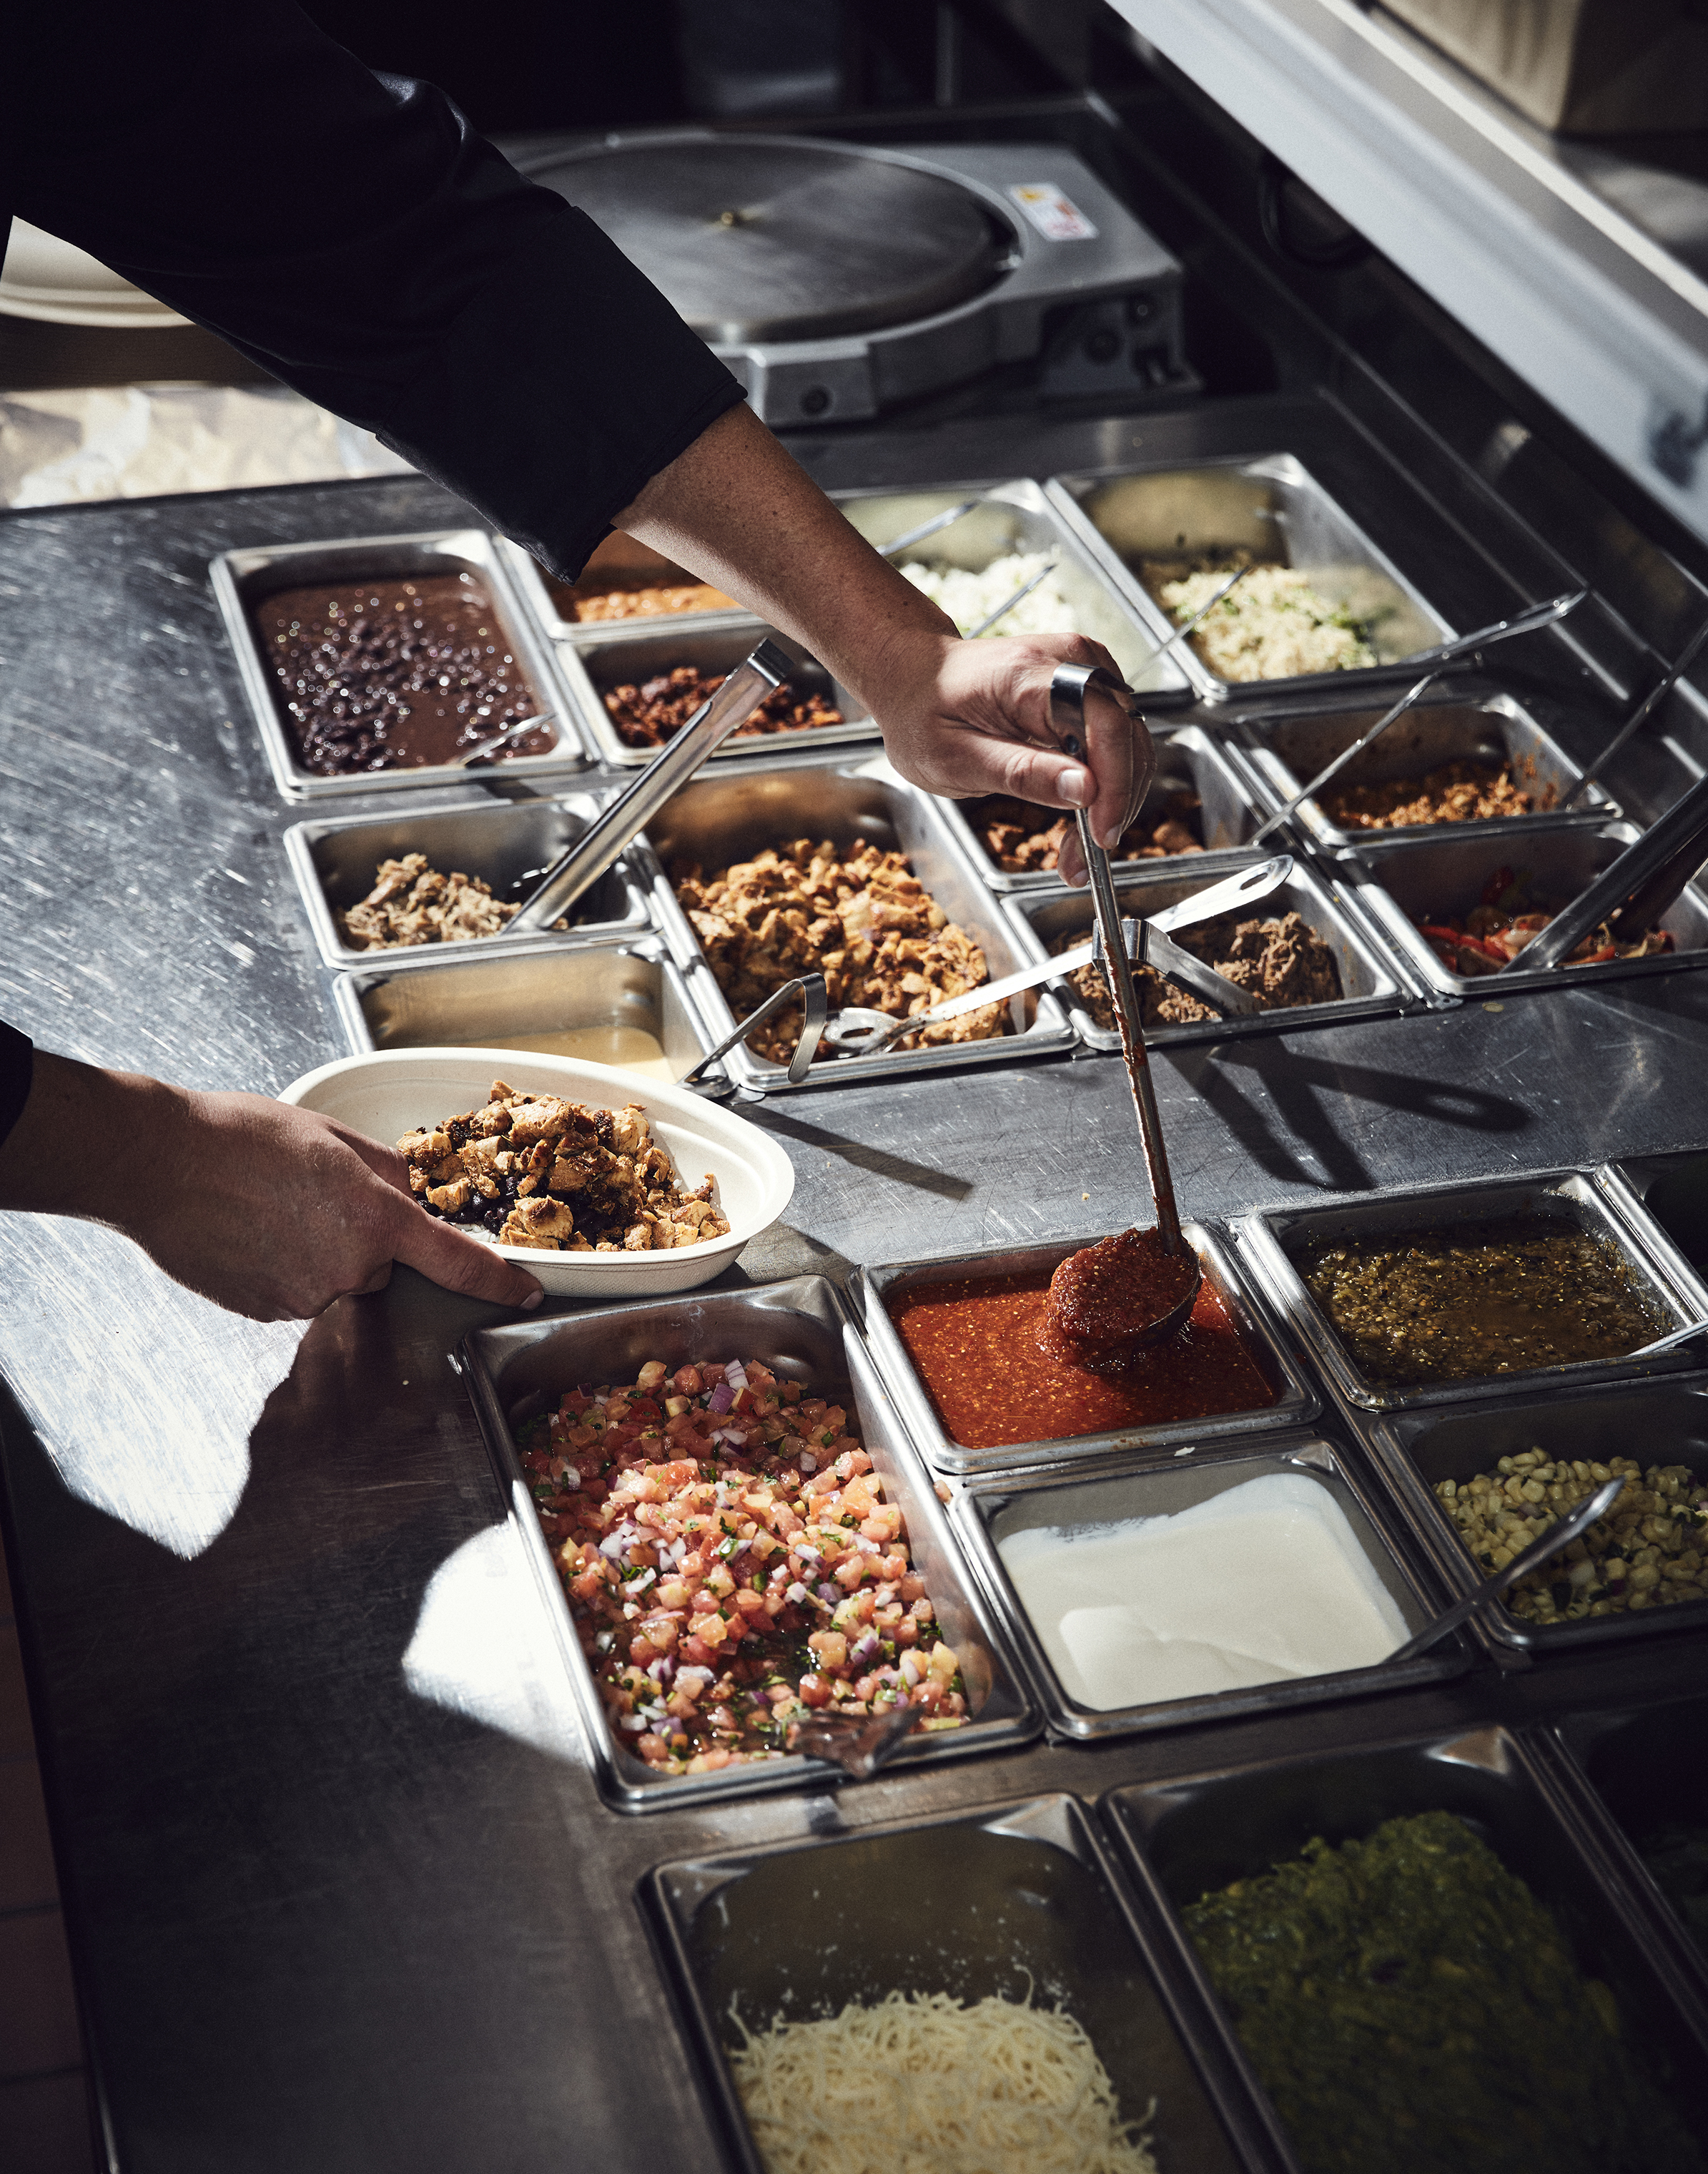 Chipotle is testing new menu items, like nachos, quesadillas and avocado tostadas, that may soon be served alongside burrito bowls. (Shaughn and John for TIME)